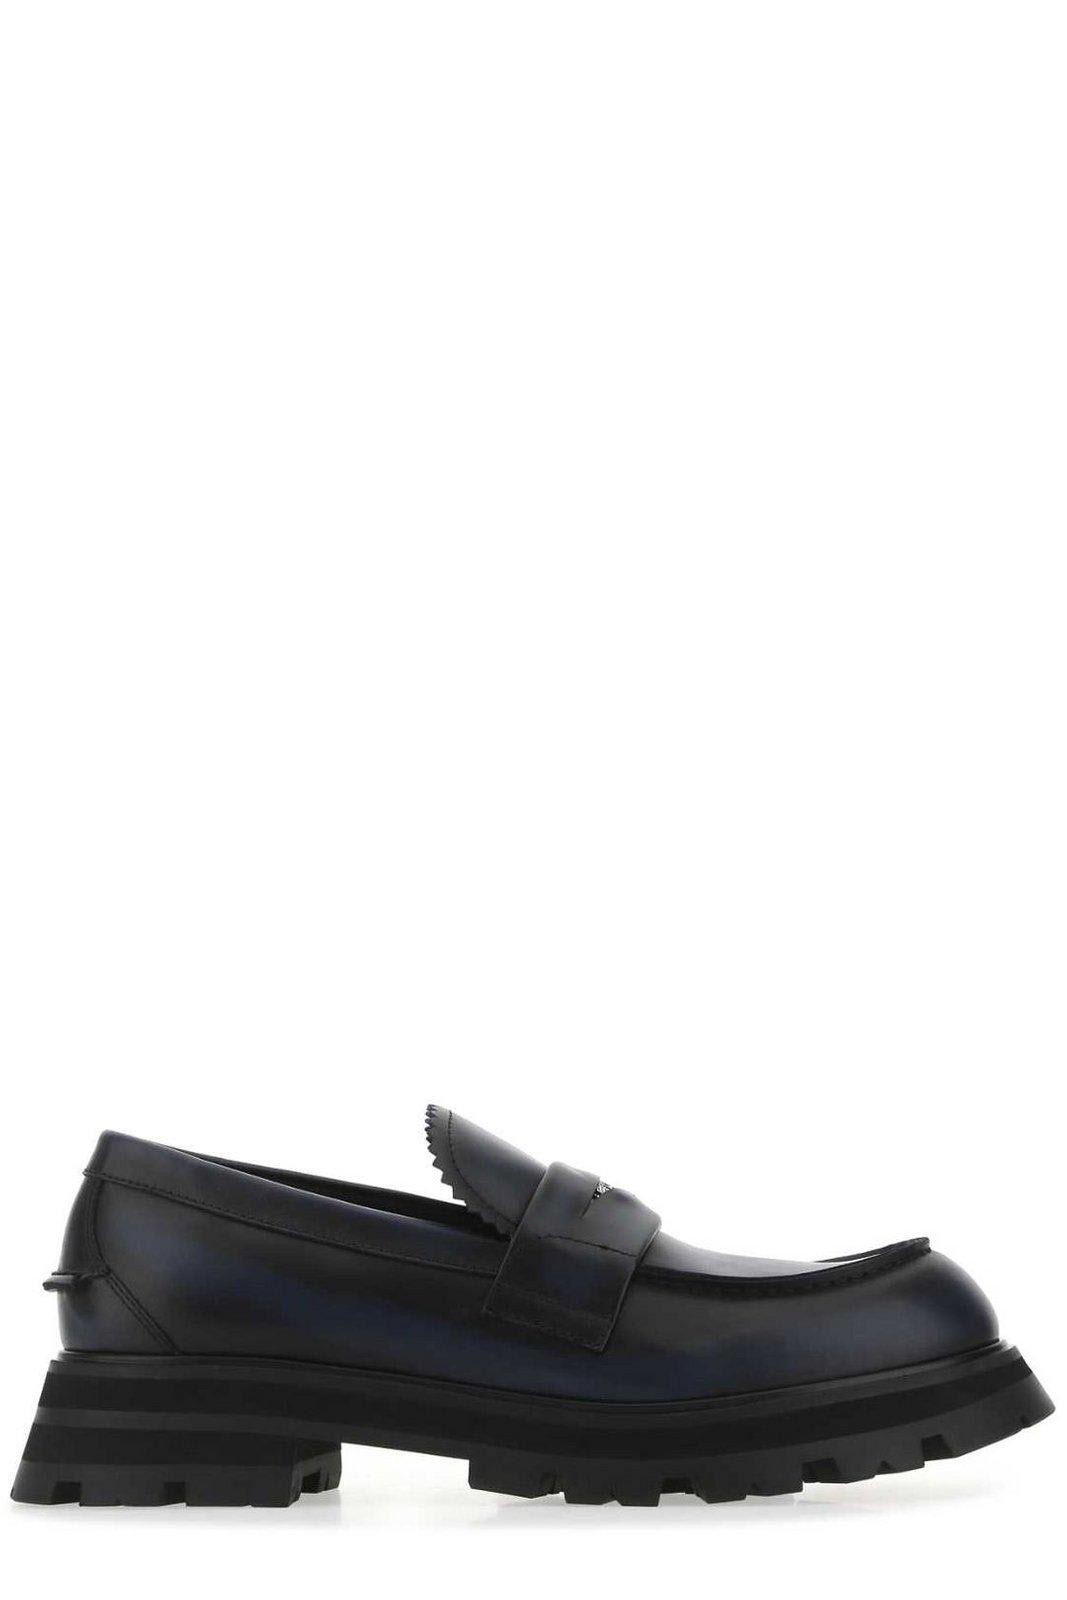 Alexander McQueen Two-toned Loafers